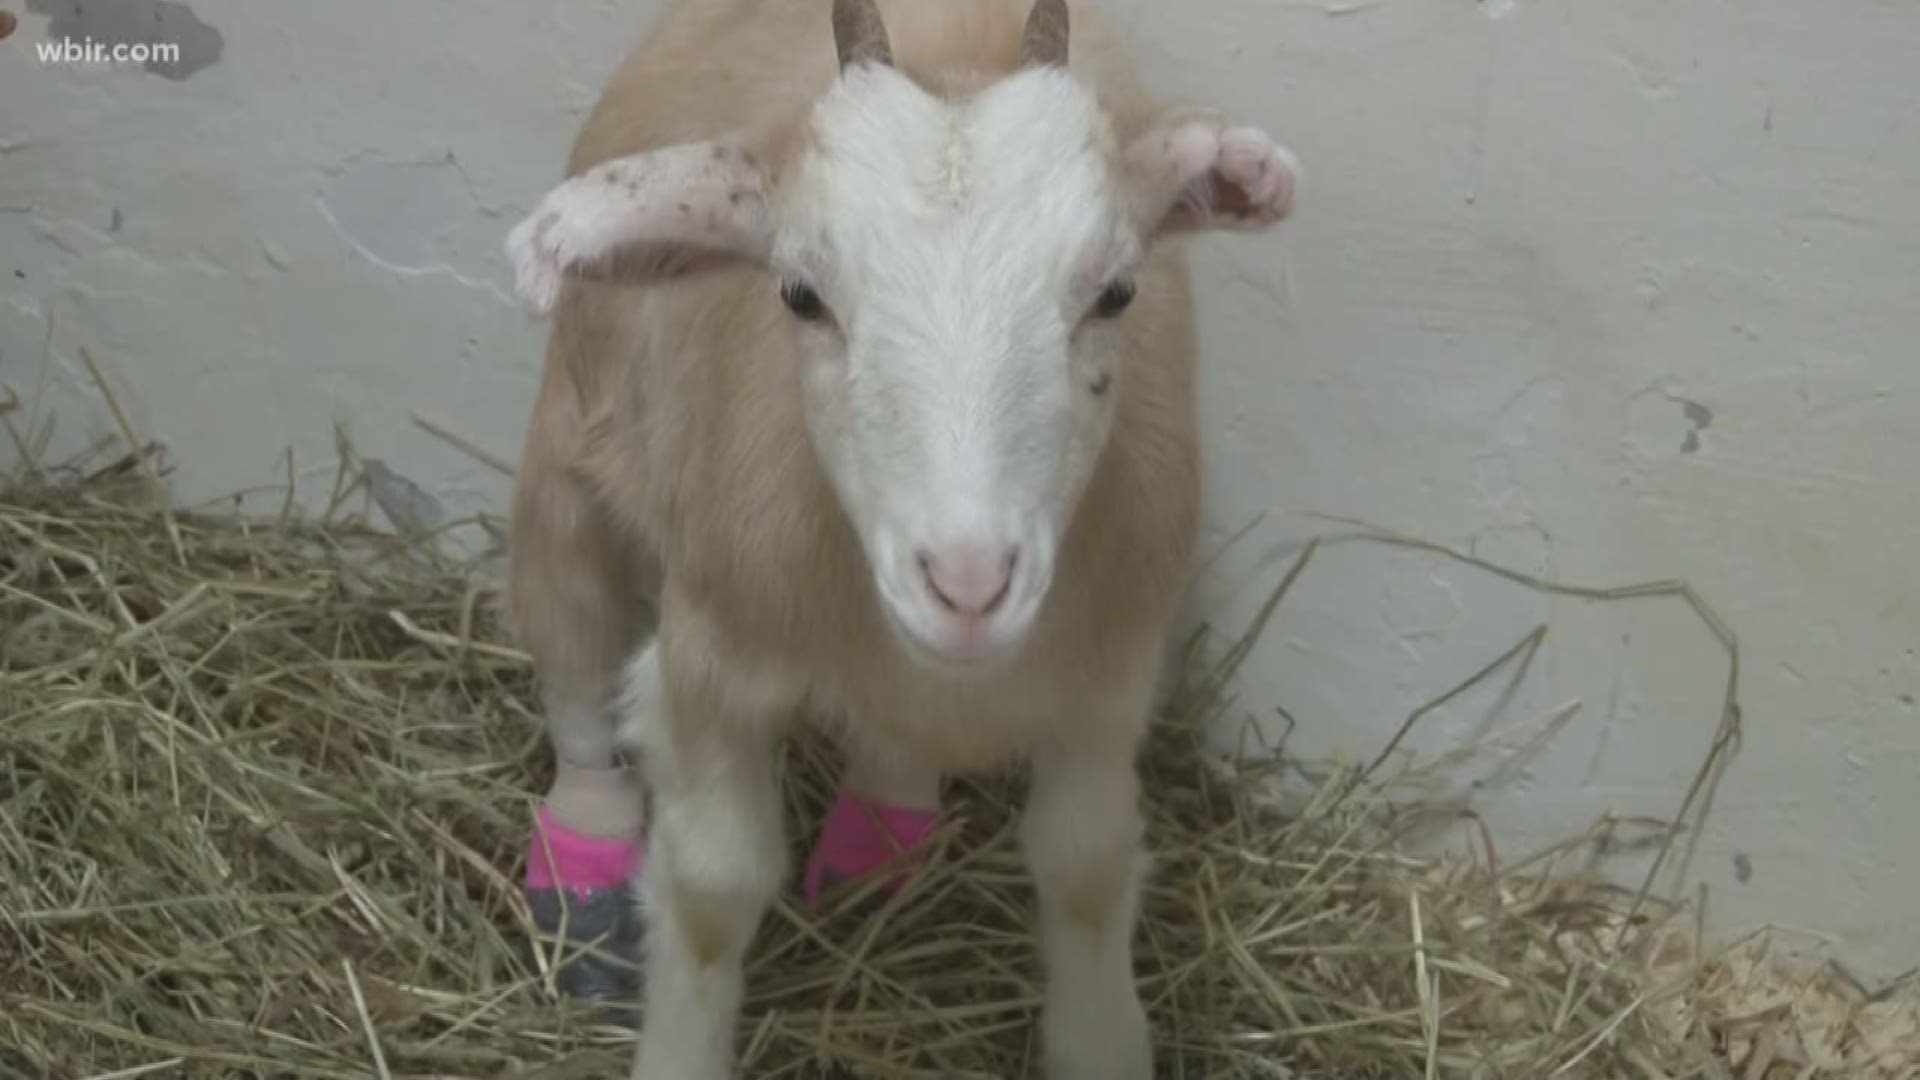 Lolli lost both of her hind feet last winter due to extremely cold temperatures. A rescue called the Gentle Barn and UT Vet School teamed up to get her prosthetic legs and teach her to walk again